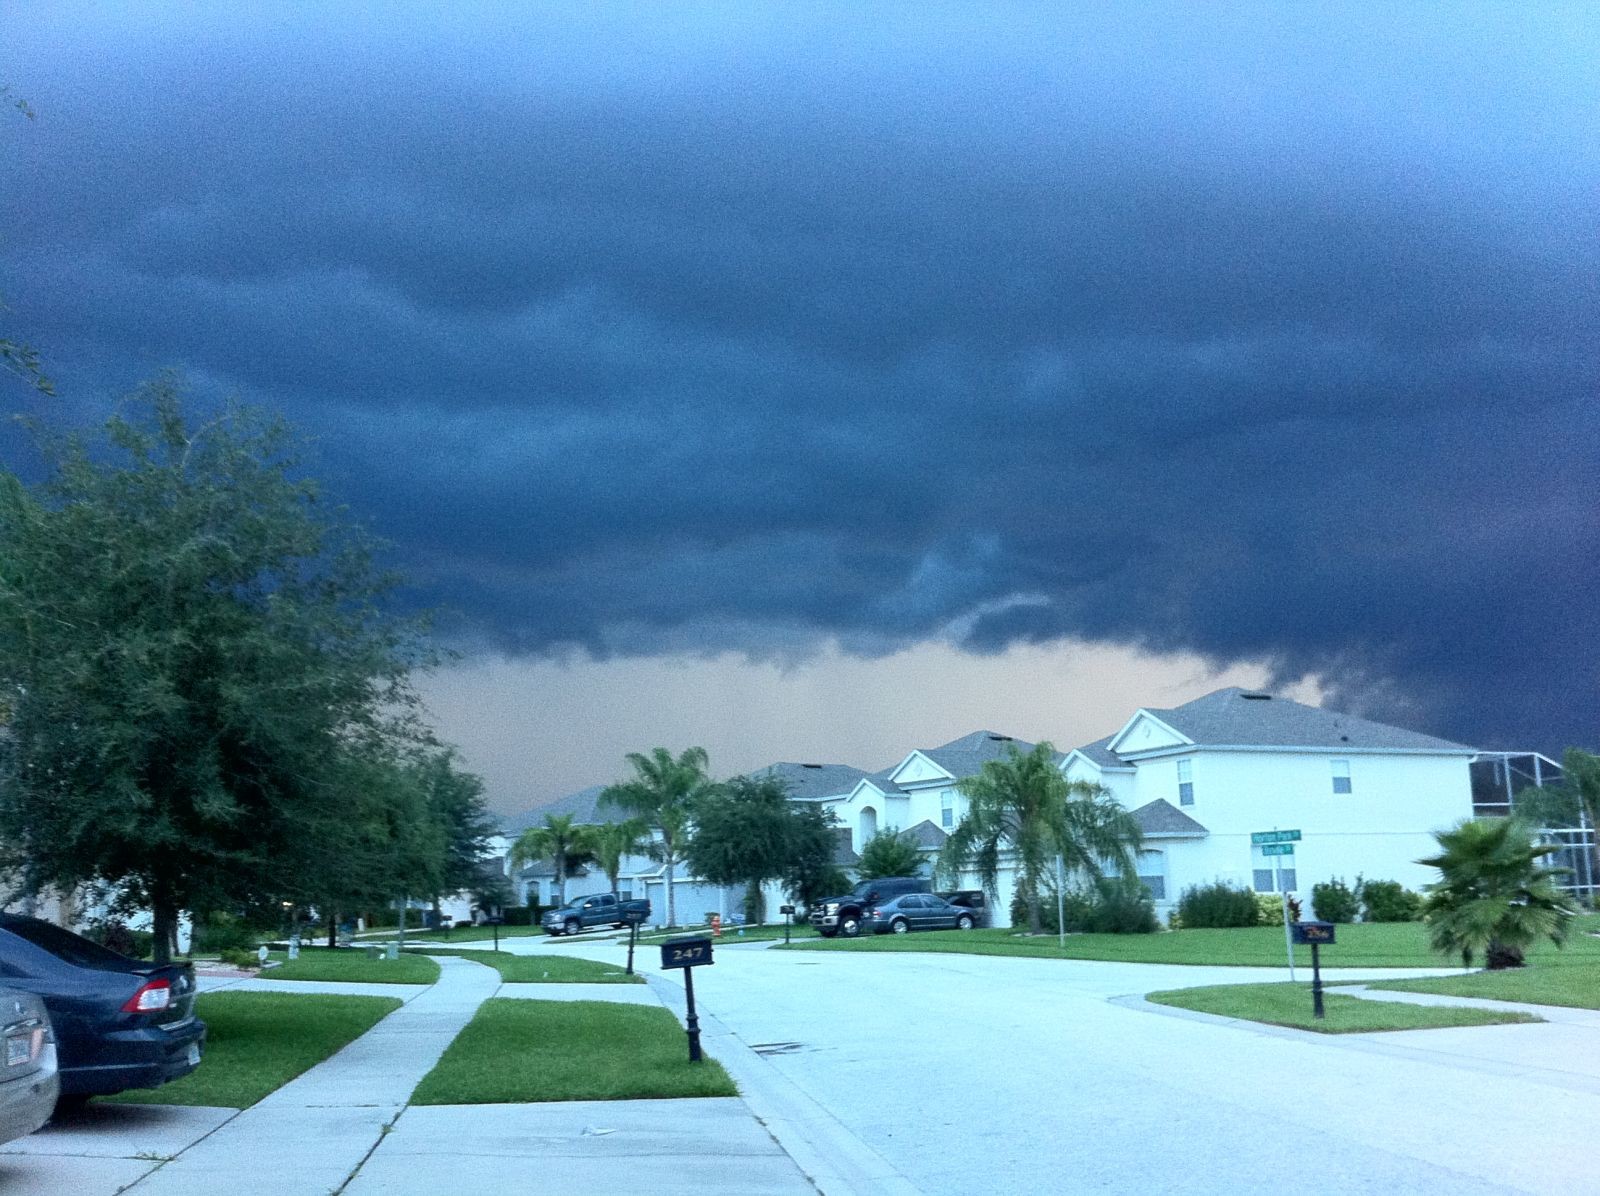 Severe Thunderstorm with weather warning attached rolling into Davenport, Florida